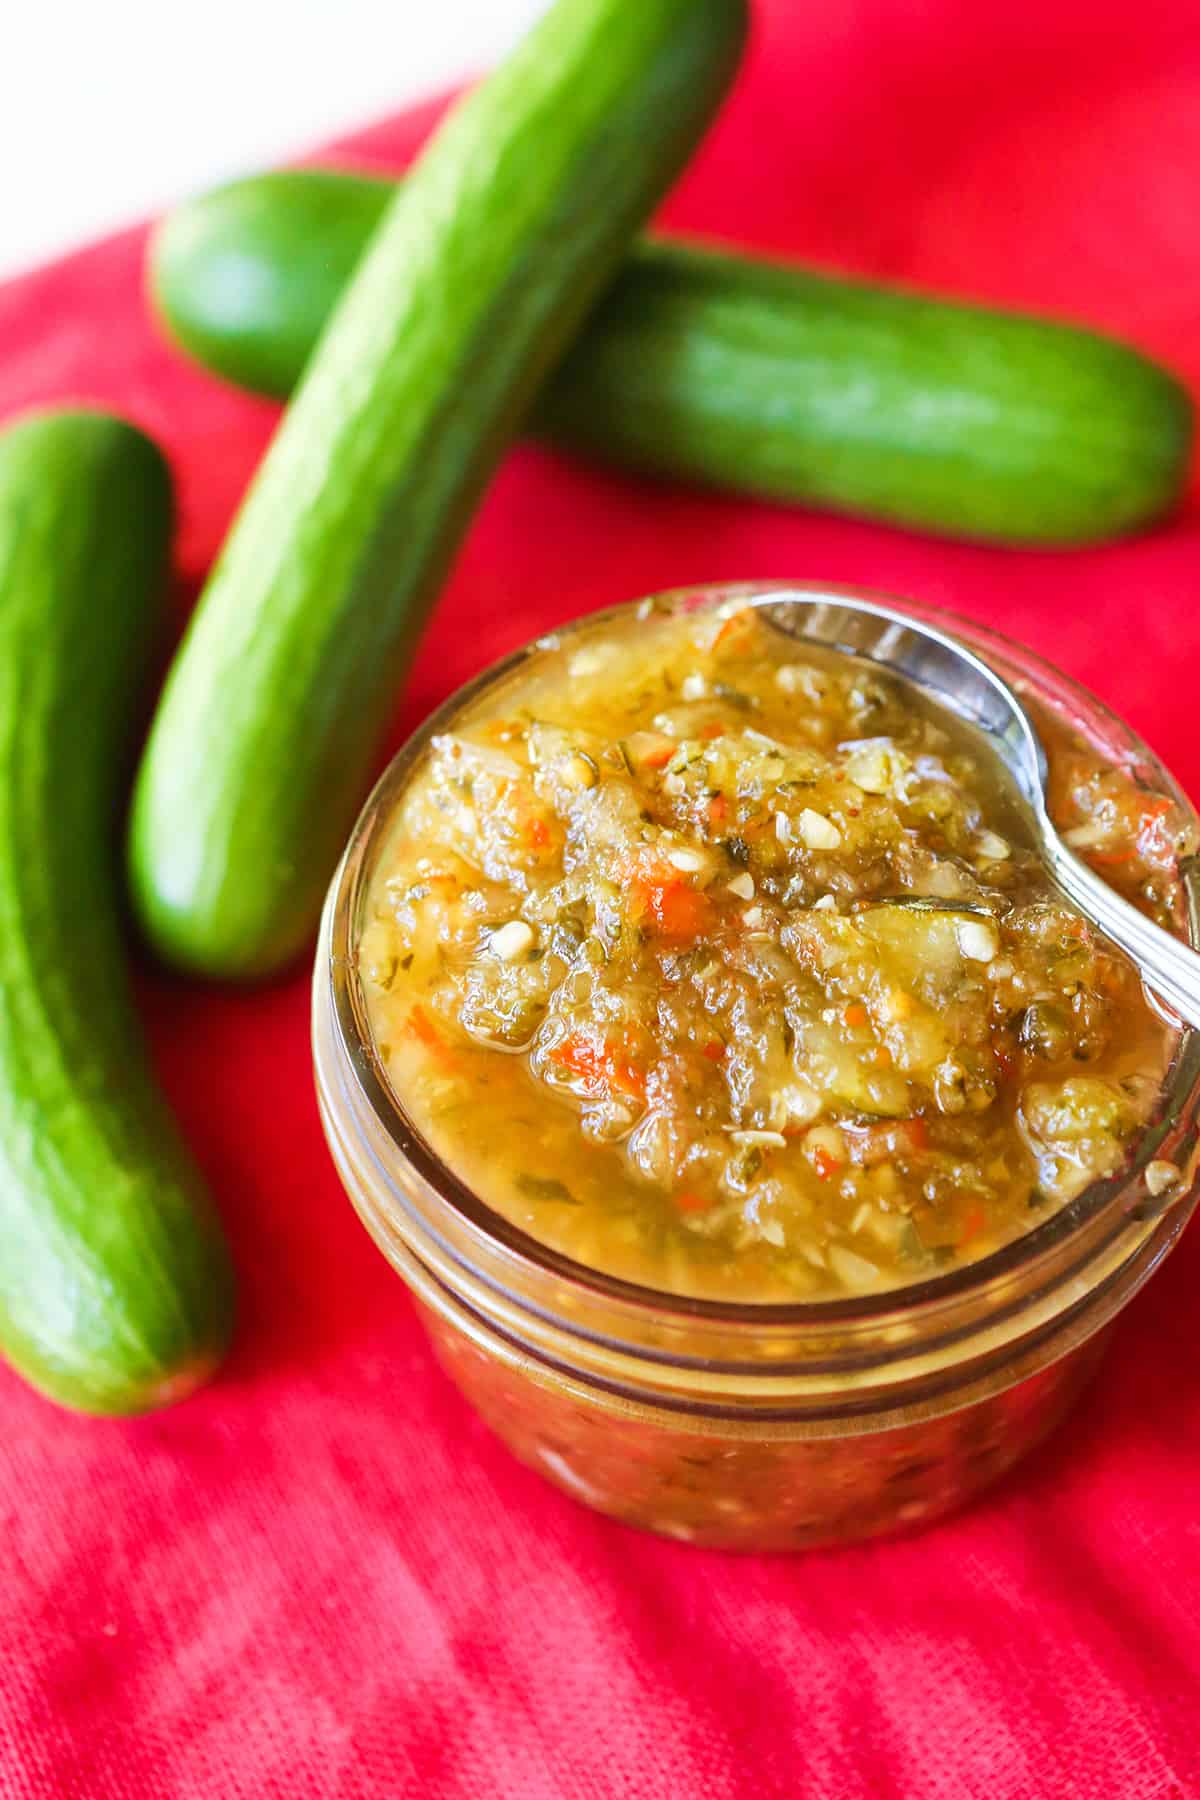 Heaping jar of relish sitting next to cucumbers.